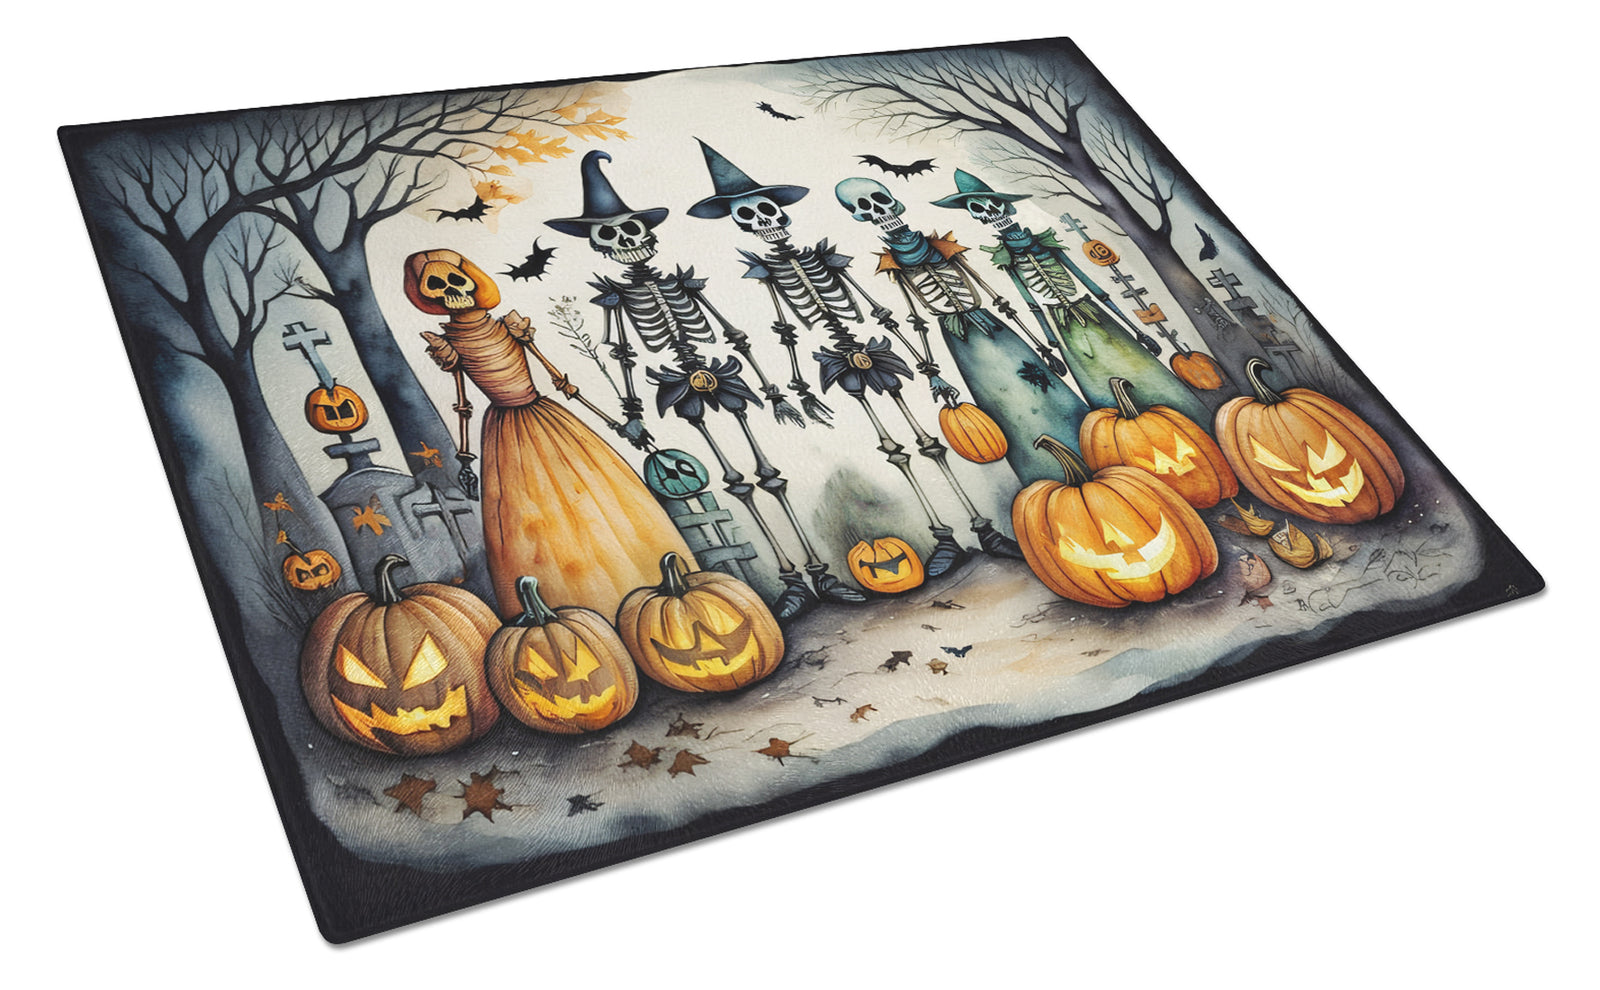 Buy this Calacas Skeletons Spooky Halloween Glass Cutting Board Large